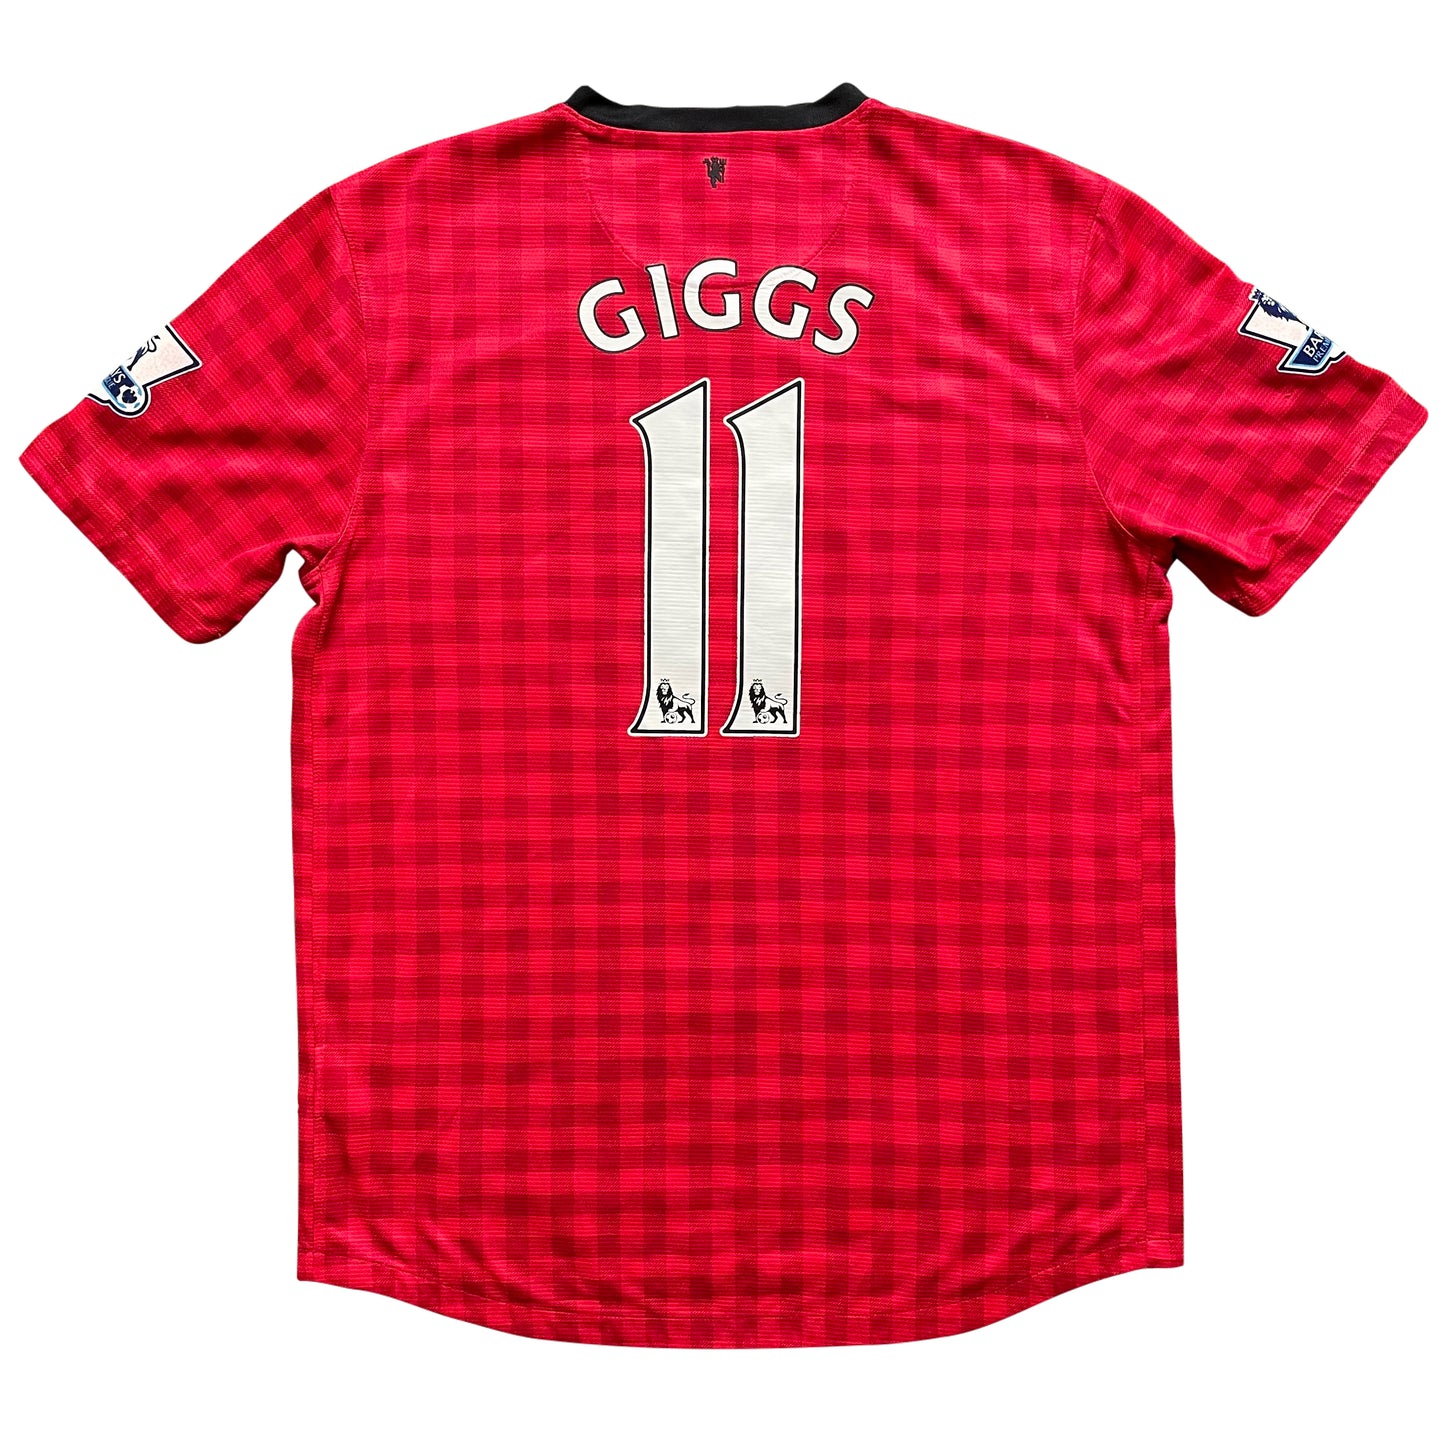 2012-2013 Manchester United FC home shirt #11 Giggs (L)